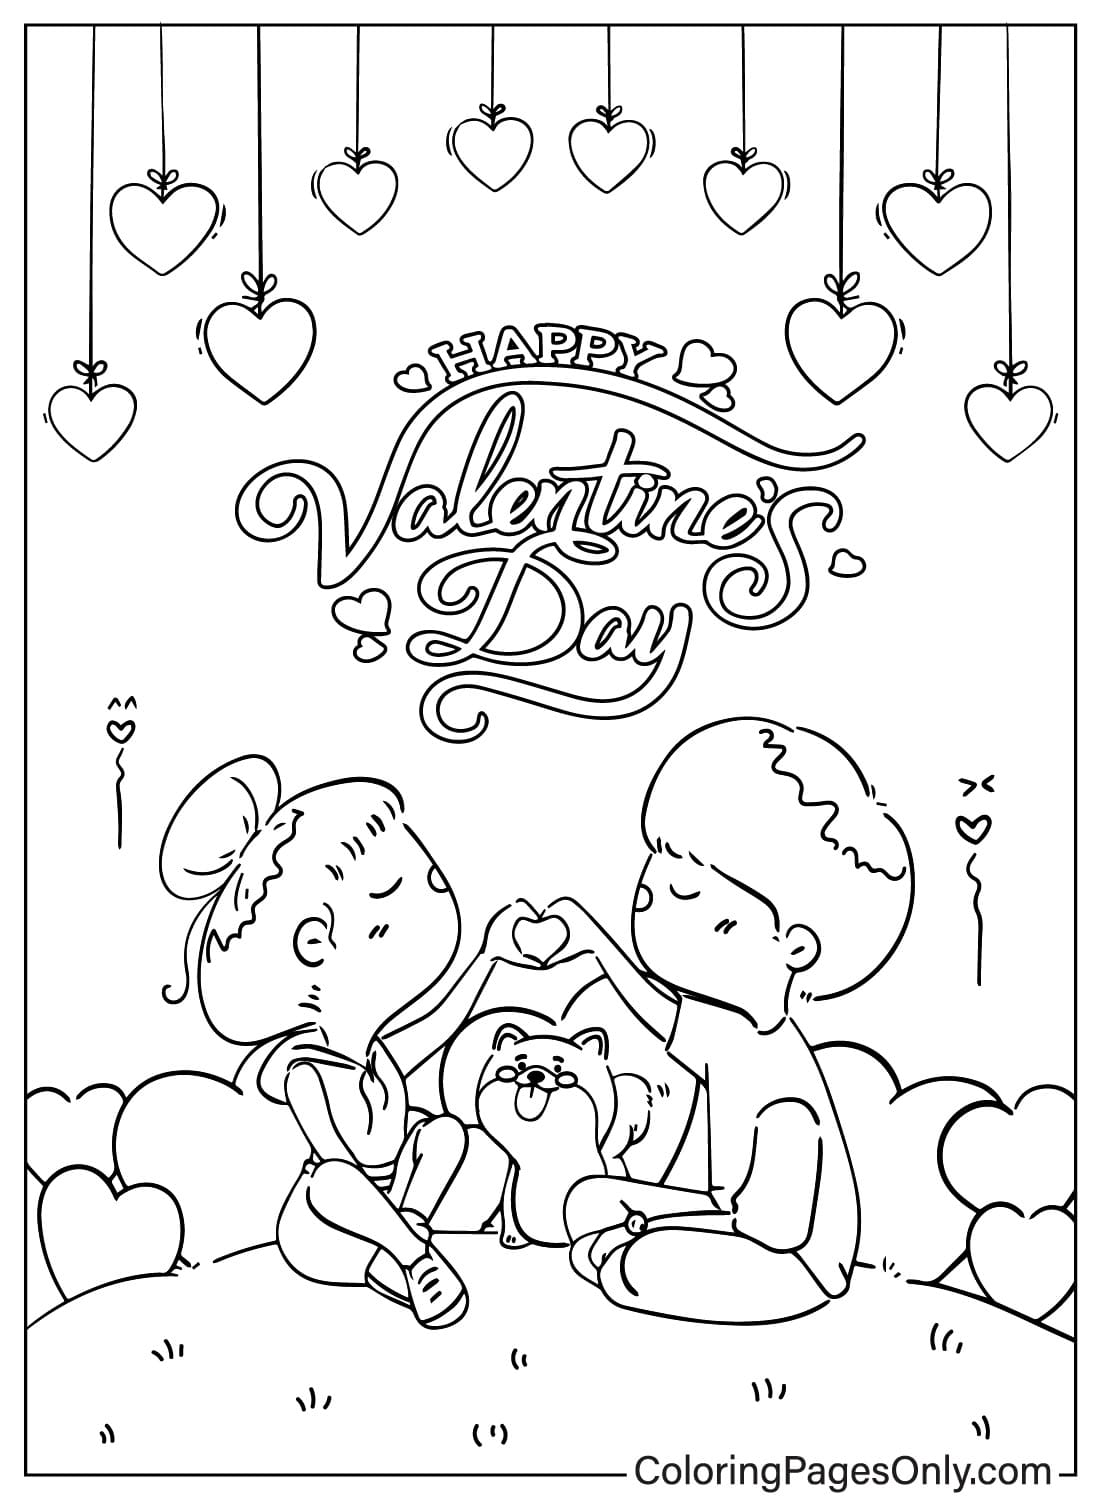 Cute Valentines Day Coloring Page